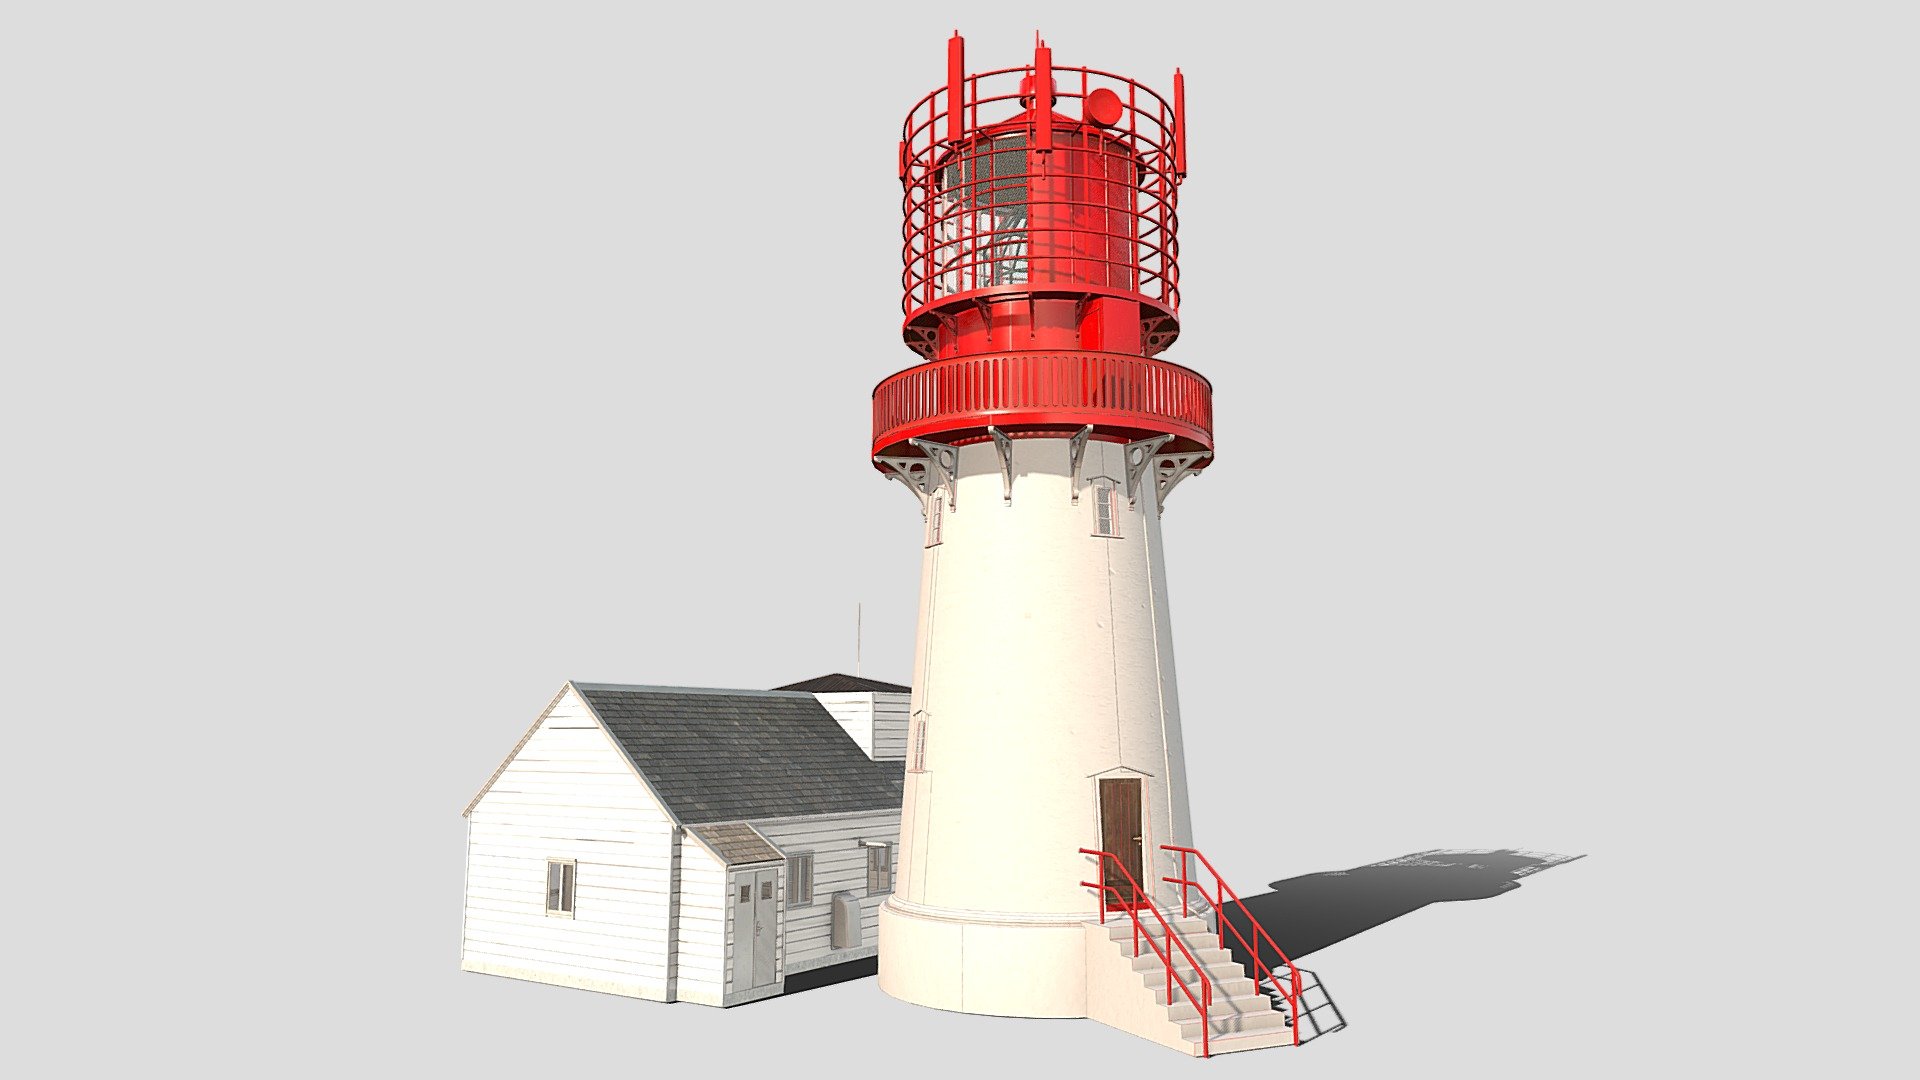 A lighthouse is a tall structure equipped with a light at the top, often located on coastlines or dangerous areas at sea, to guide and warn ships by emitting a distinctive, visible signal. Light House 3d model with realistic 4k textures. This 3D model includes a lighthouse and a house near it 3d model